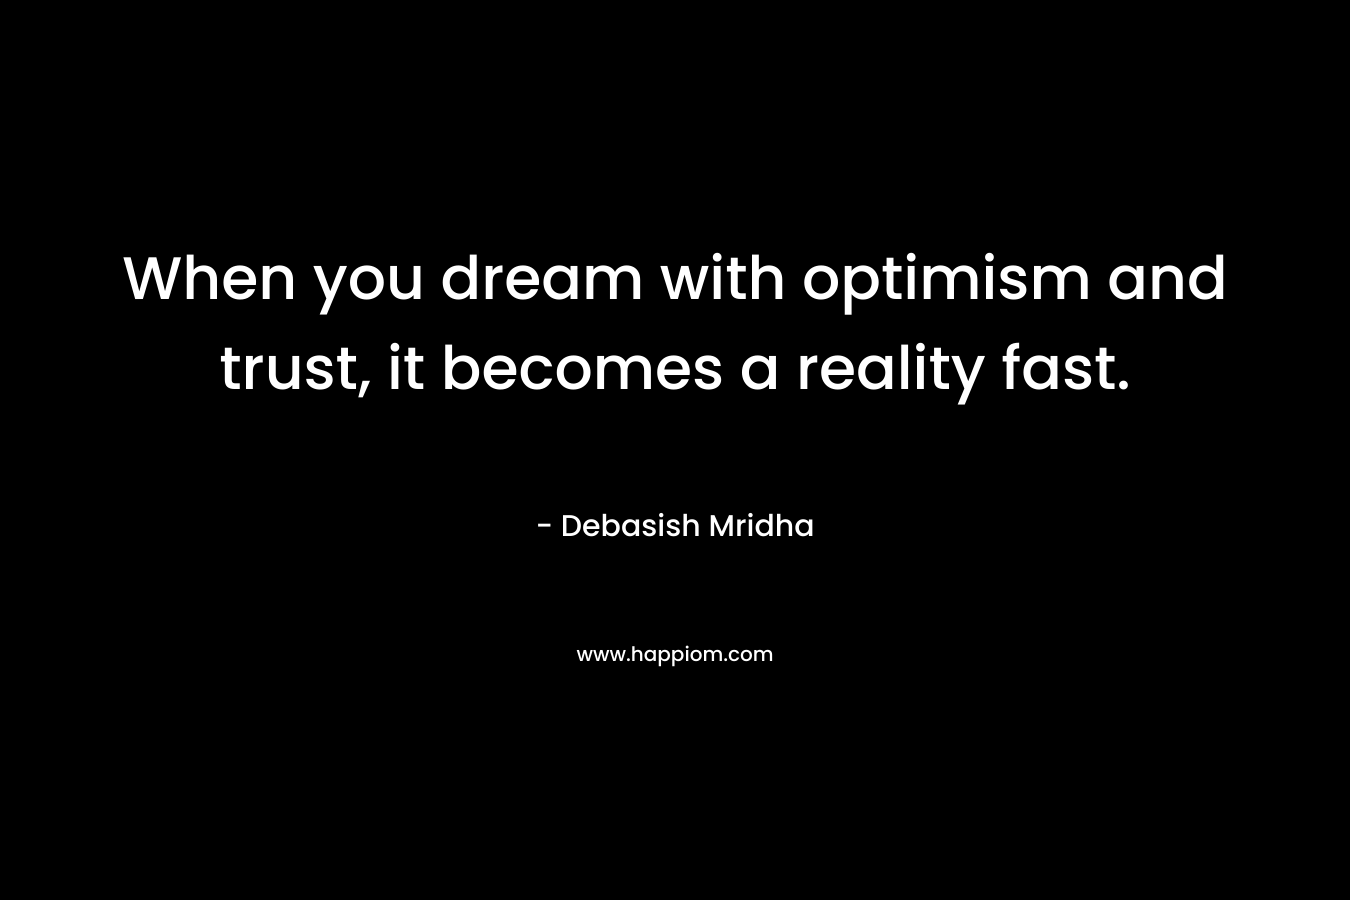 When you dream with optimism and trust, it becomes a reality fast.